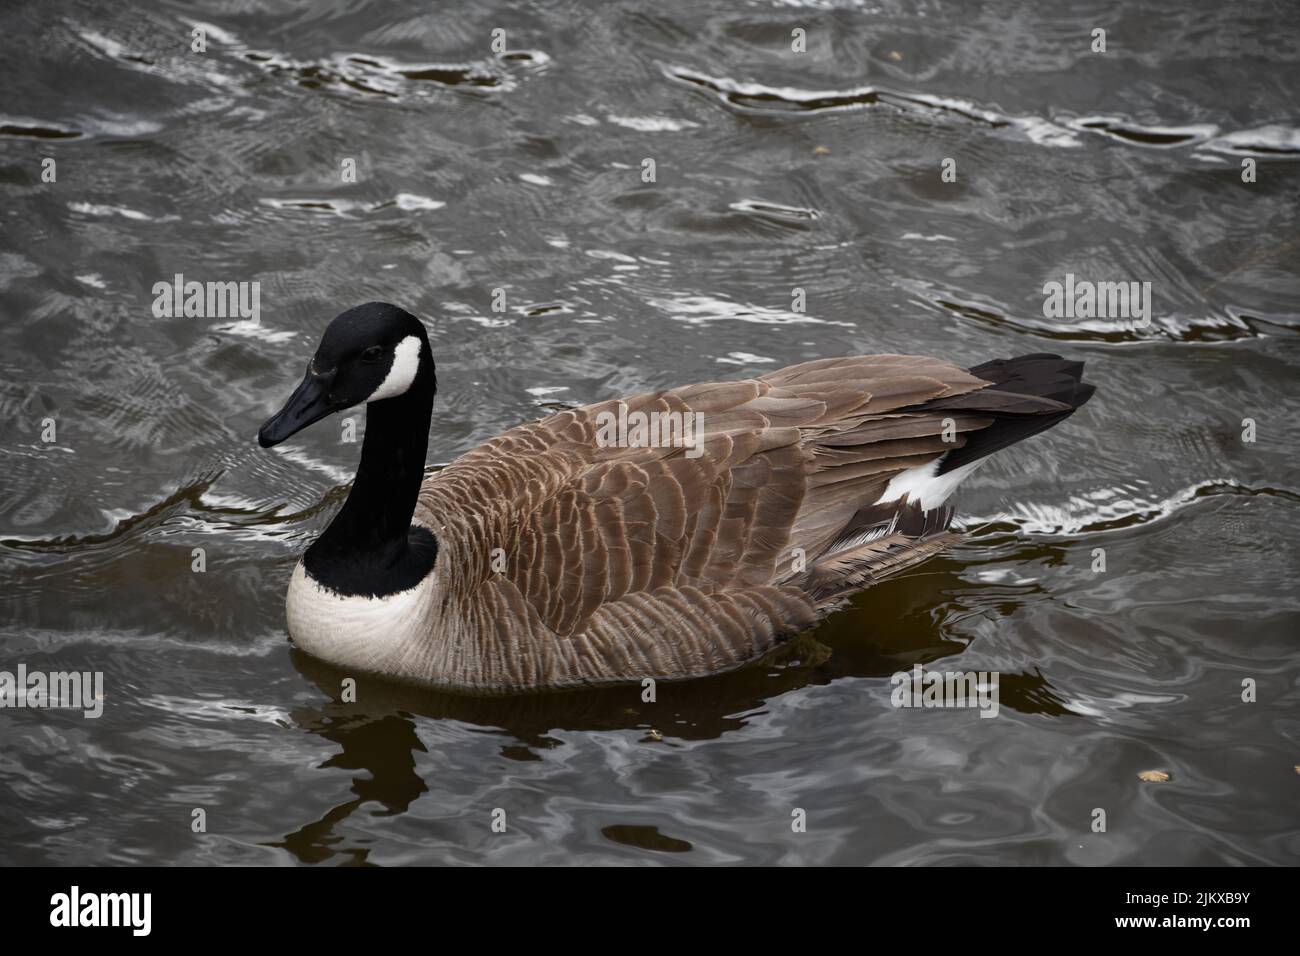 A shallow focus shot of a Canada Goose swimming in a wavy gray lake Stock Photo